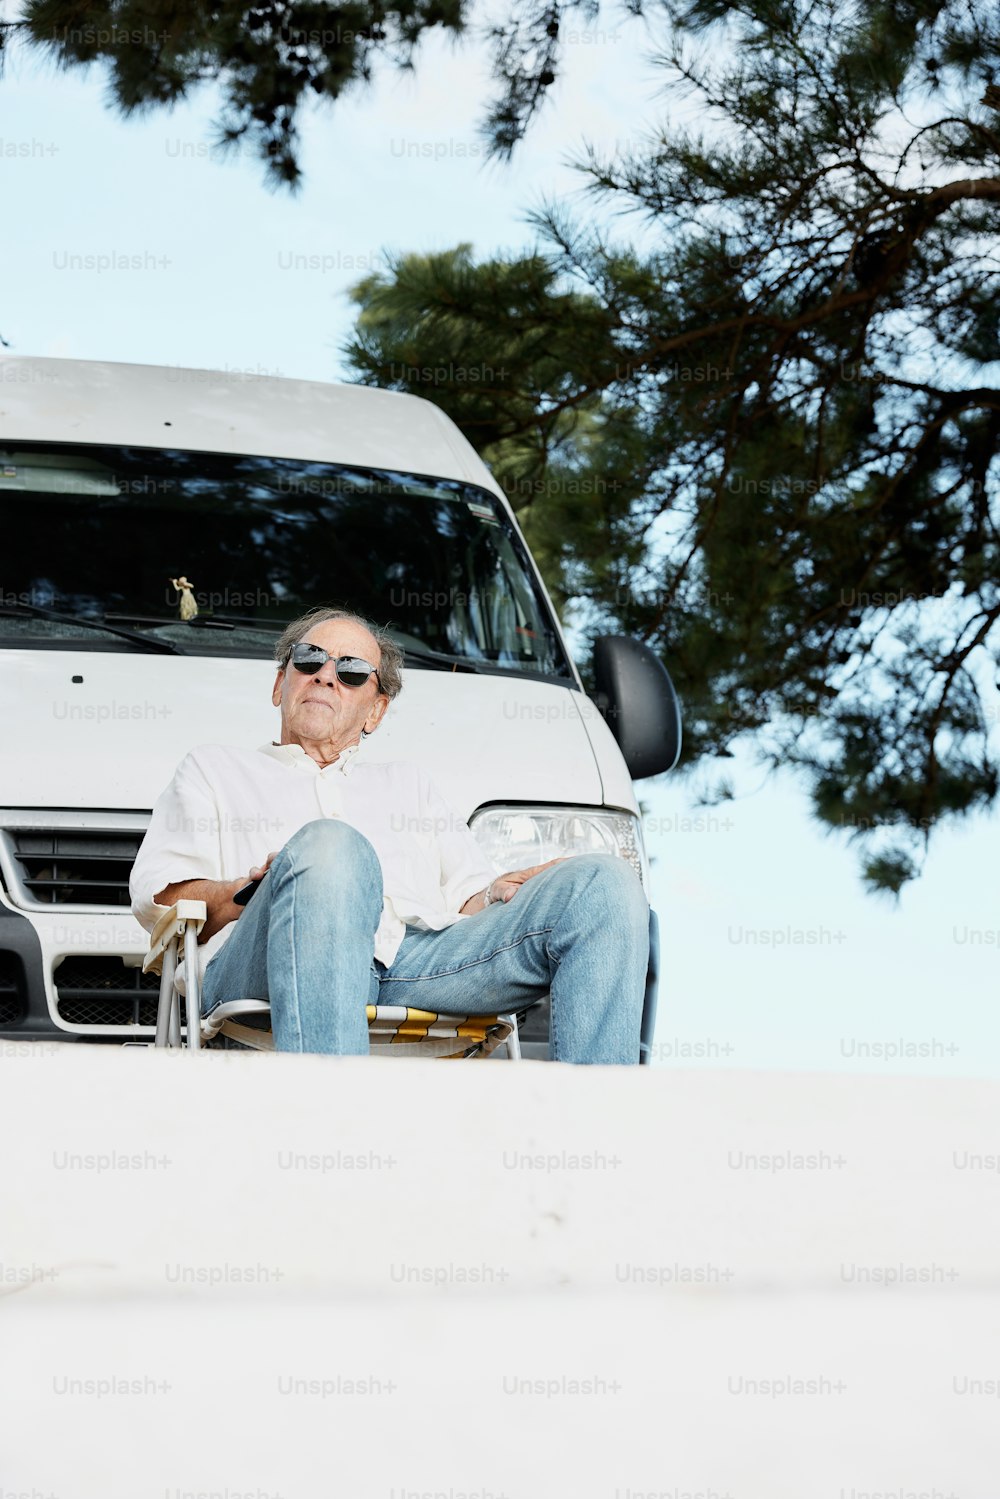 a man sitting in a chair next to a van